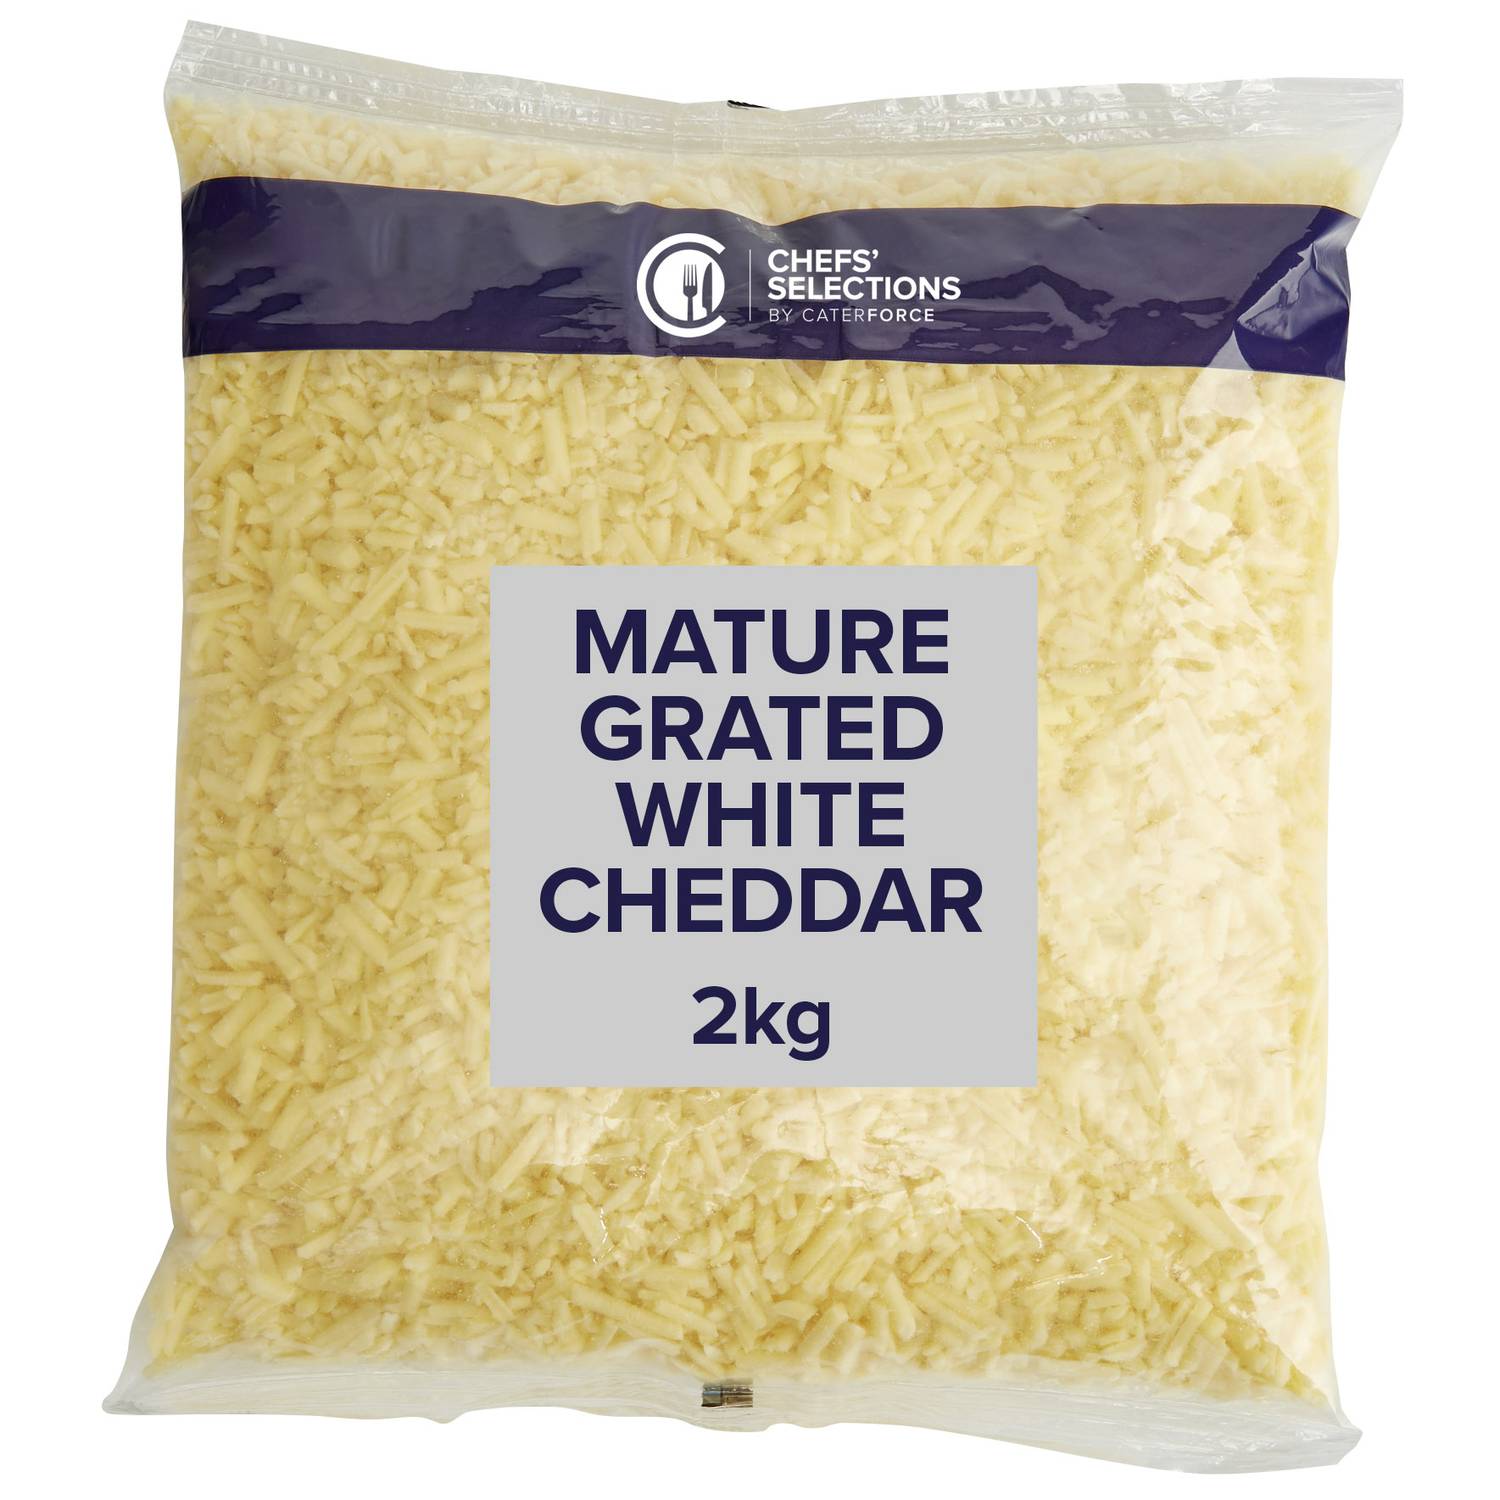 Chefs’ Selections Grated White Mature Cheddar 6 x 2kg